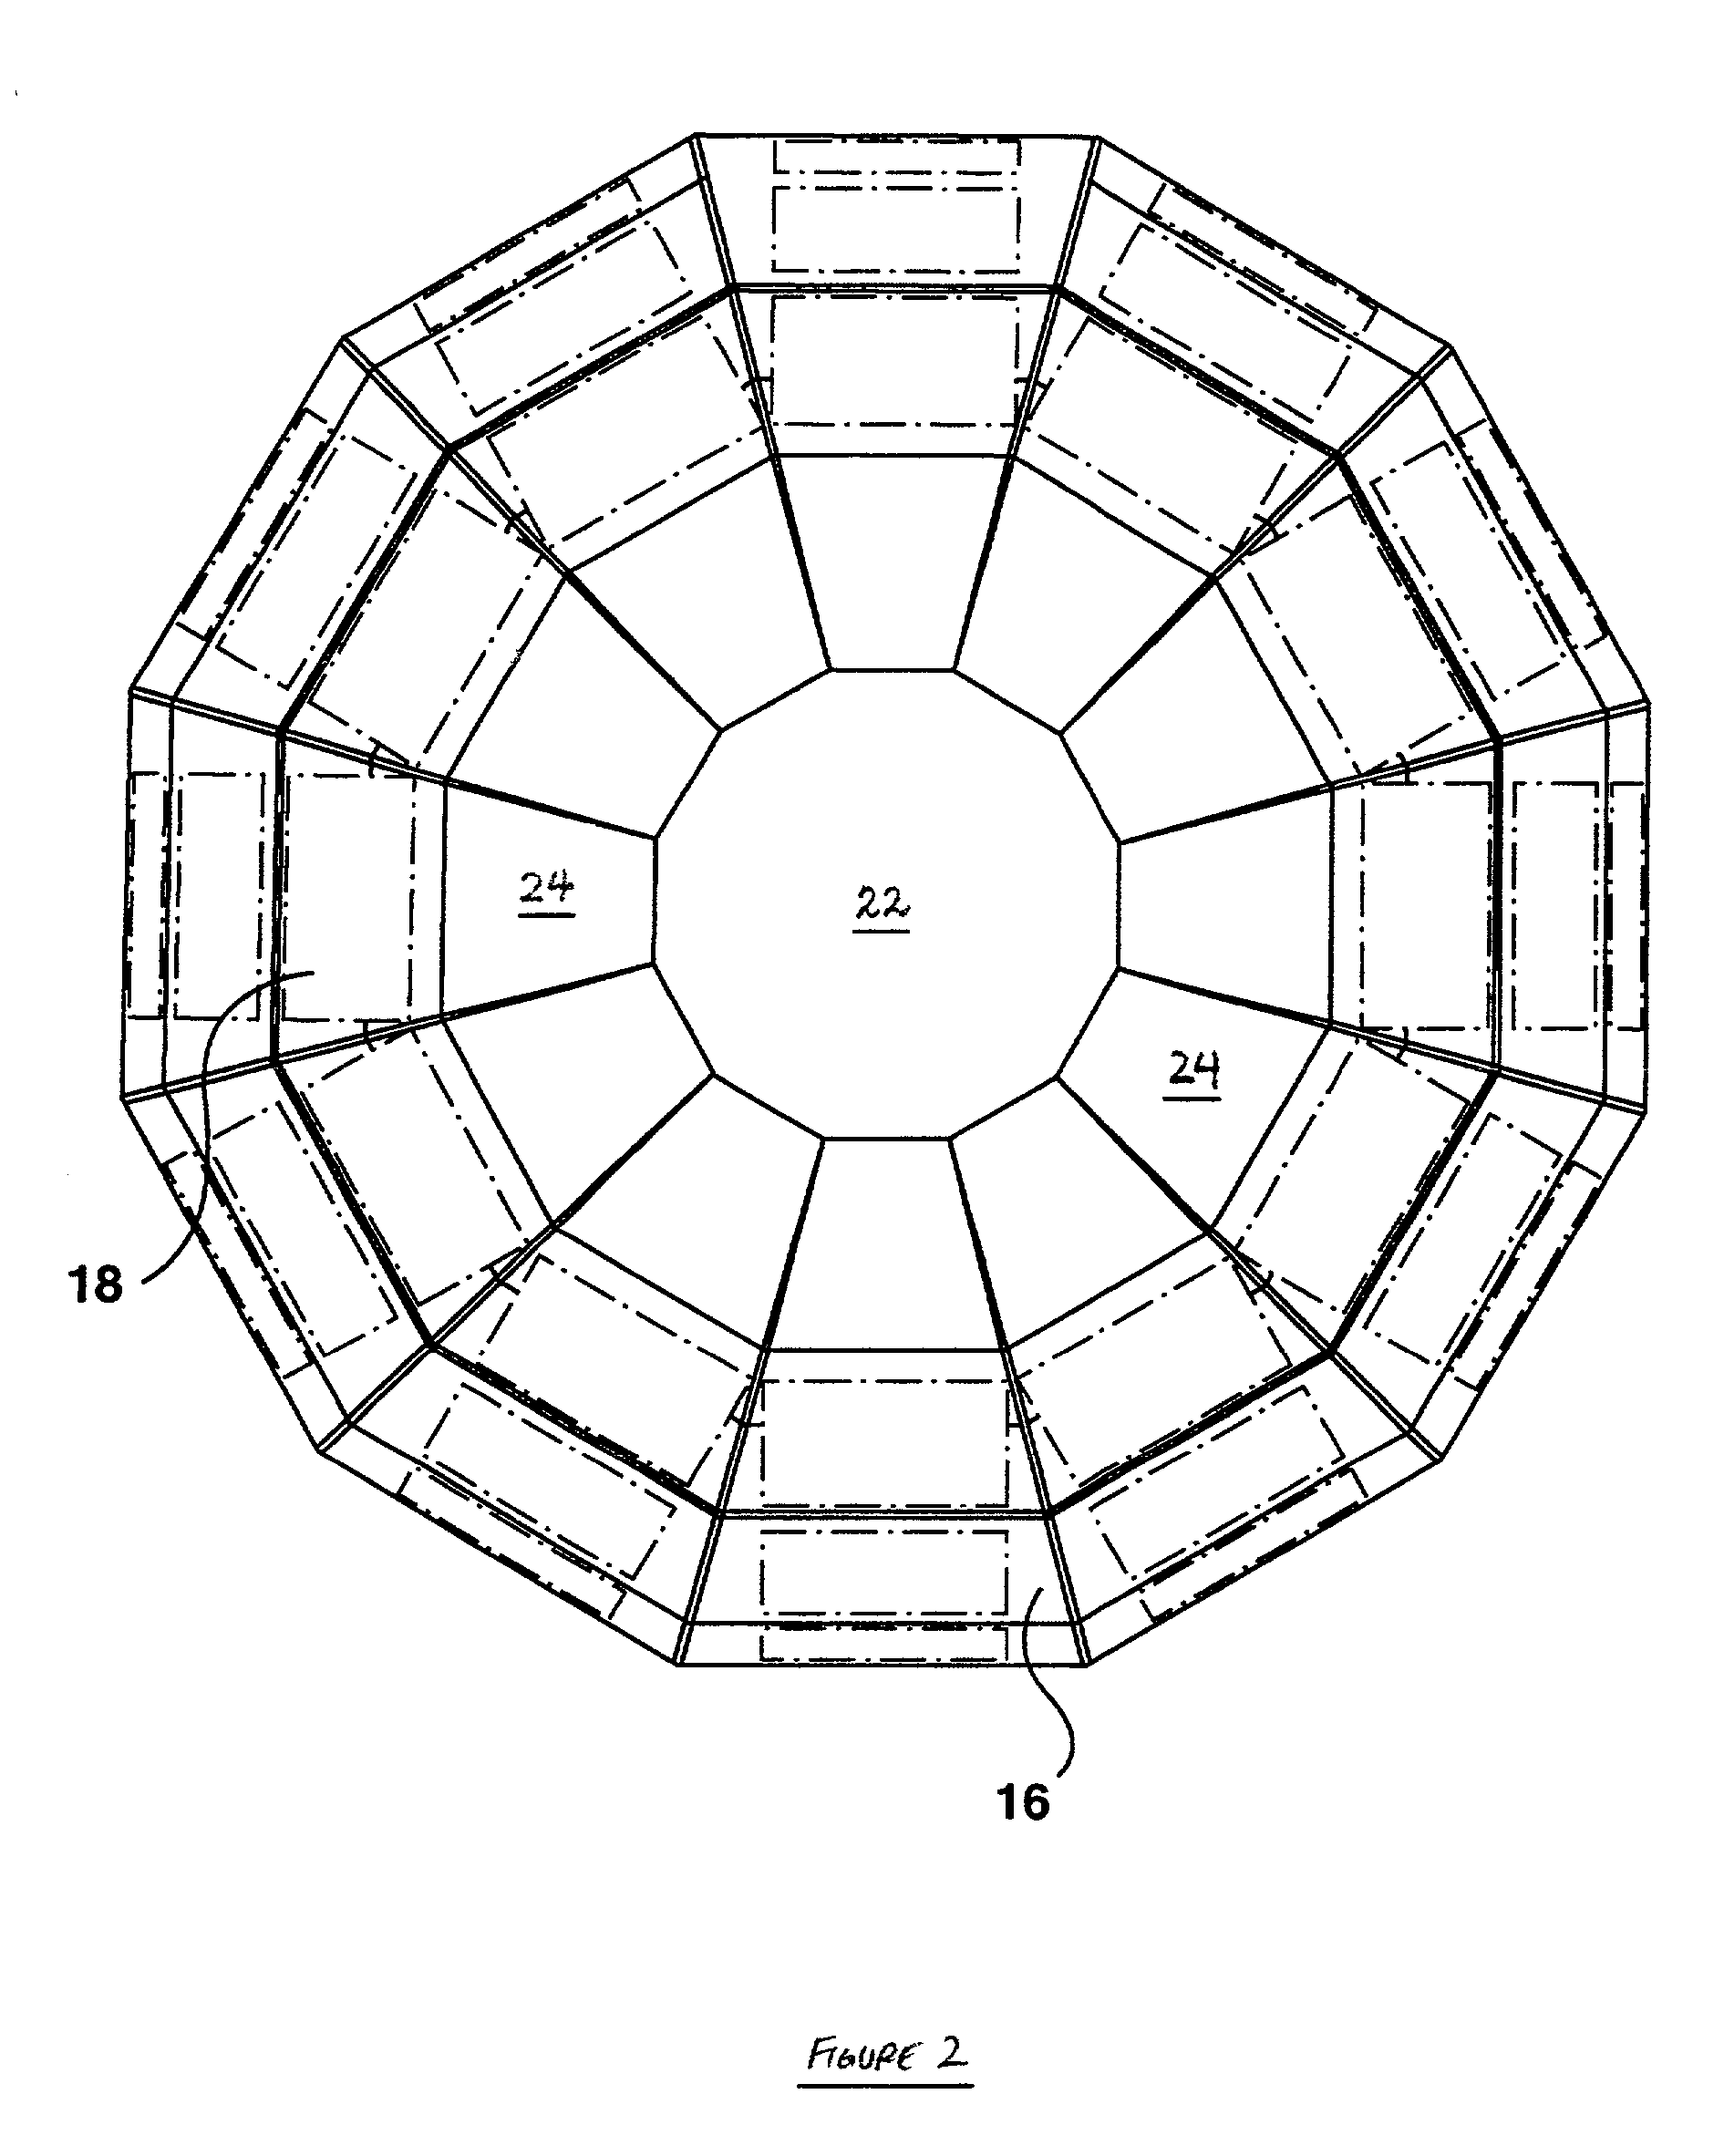 Method of representing information on a three-dimensional user interface